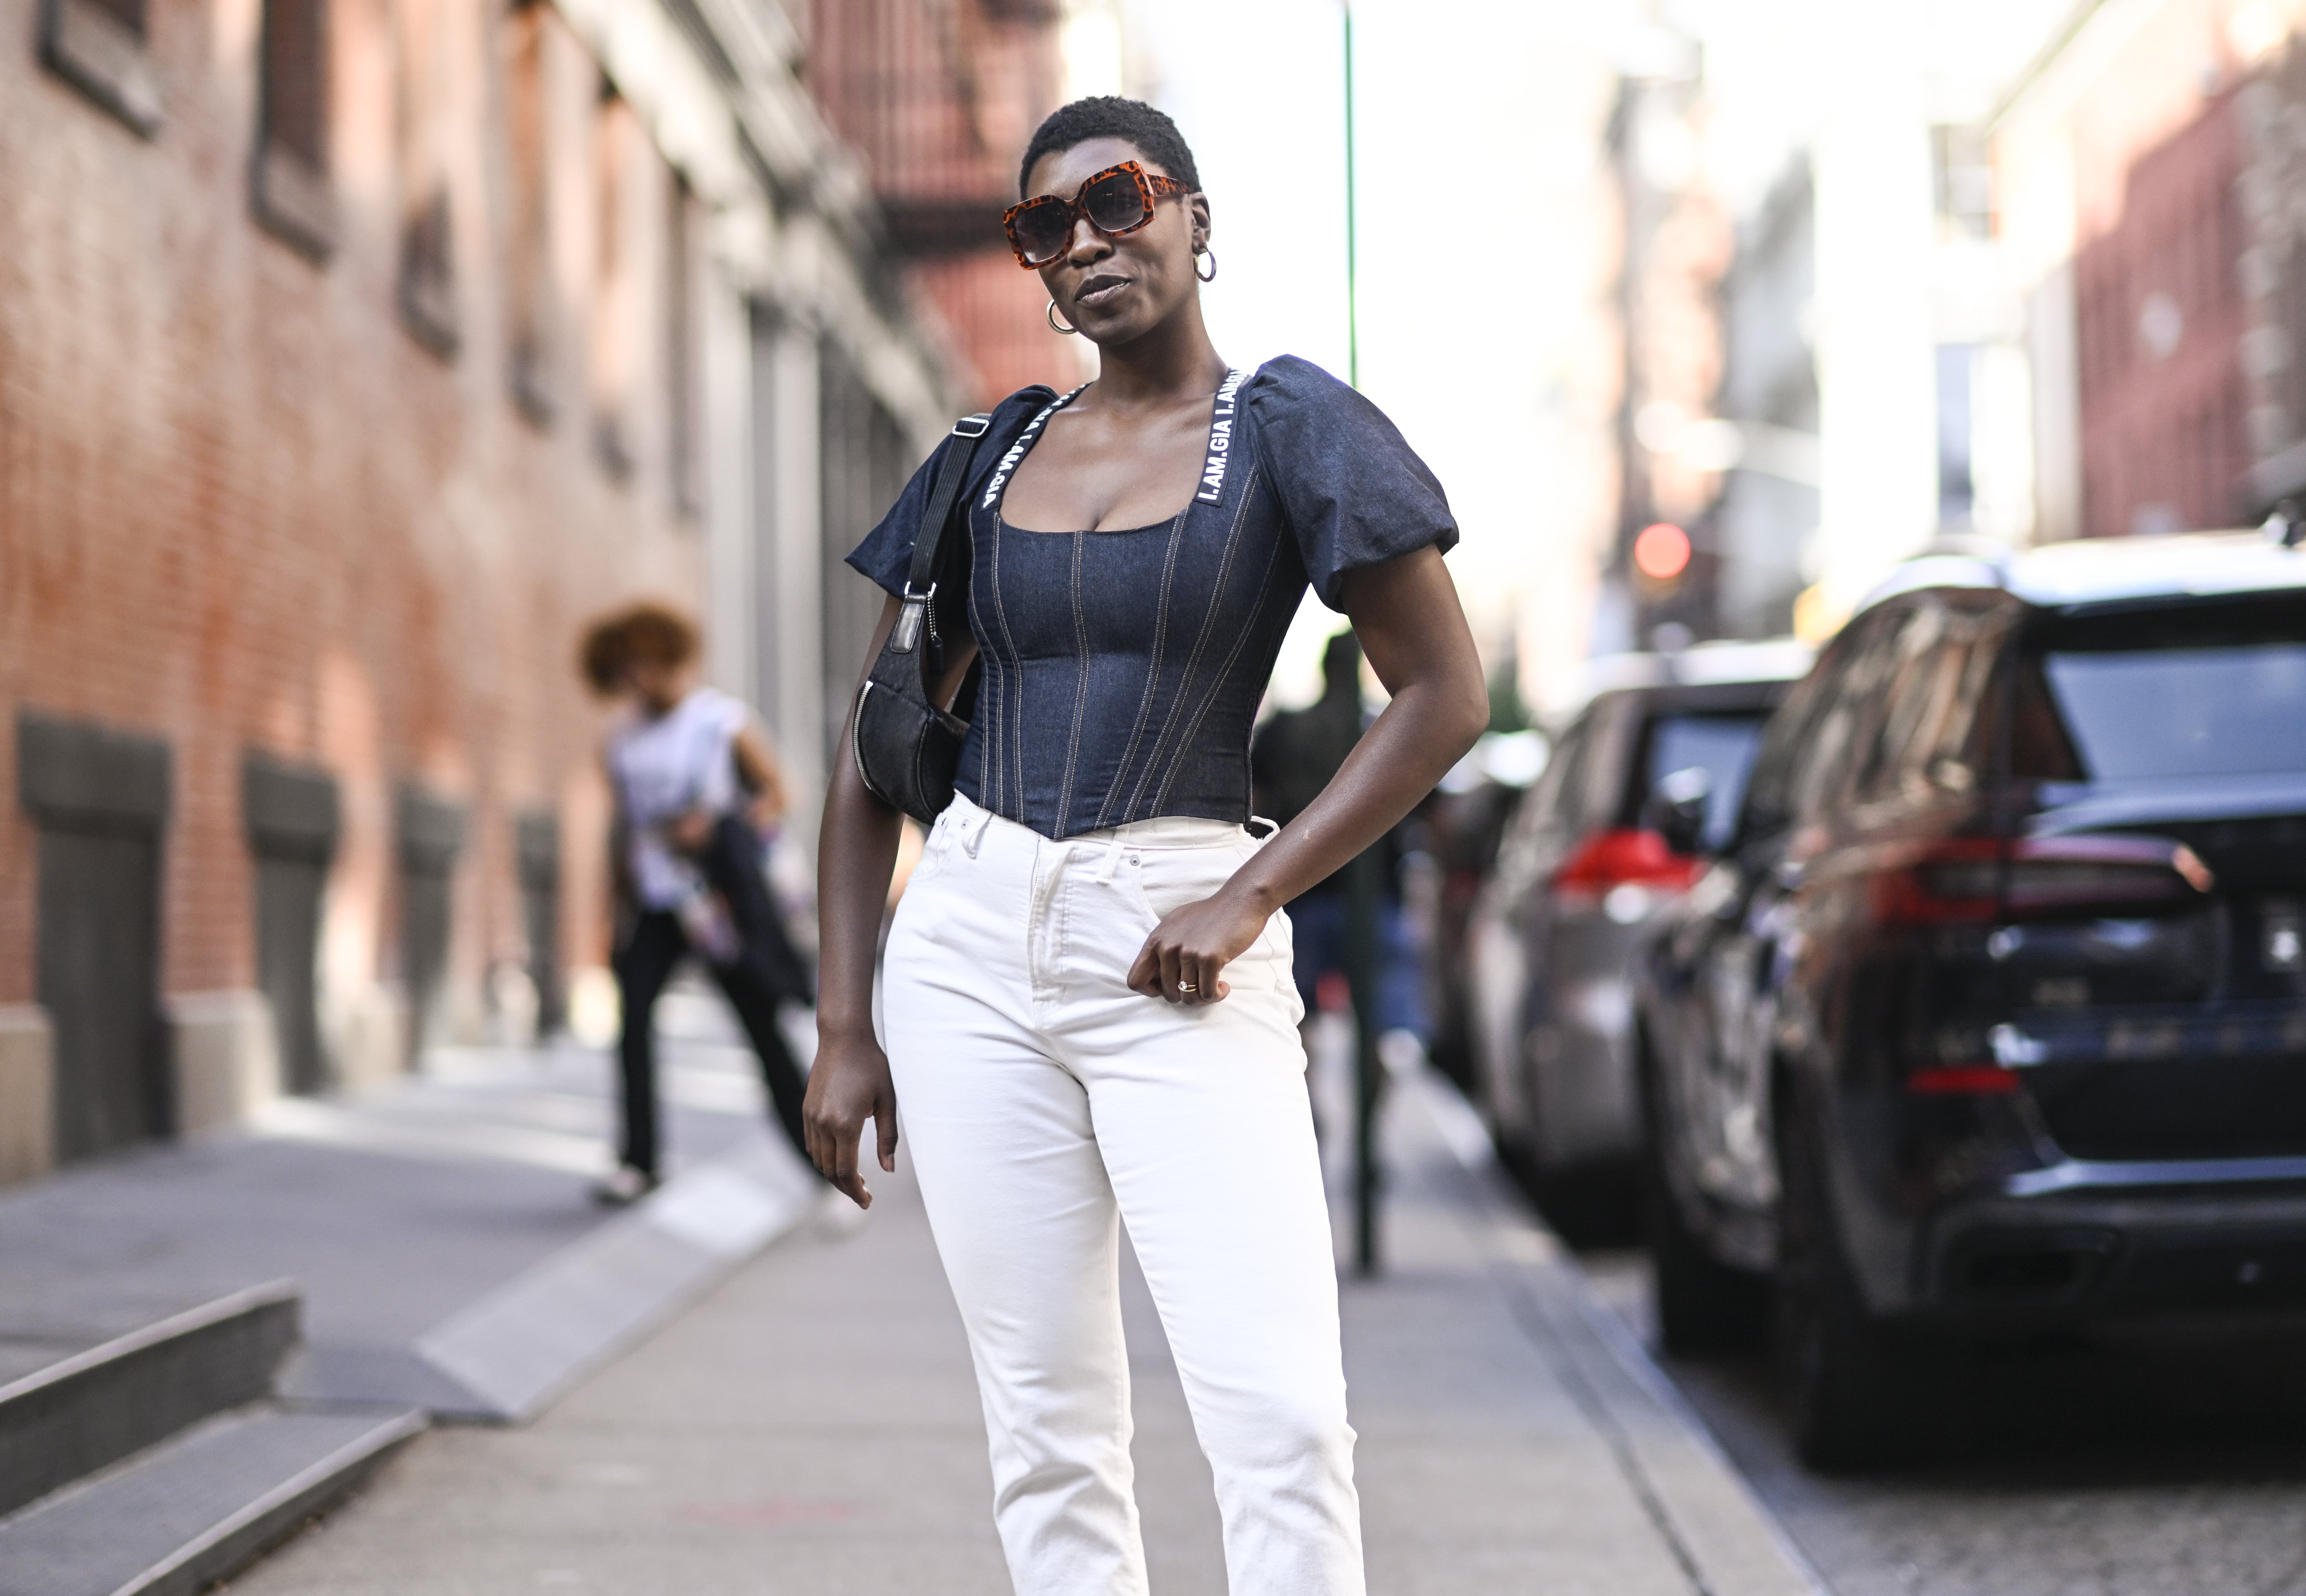 Topshop Dad Jeans: High-Waist, Straight Leg Denim For All My Fall Outfits -  The Mom Edit